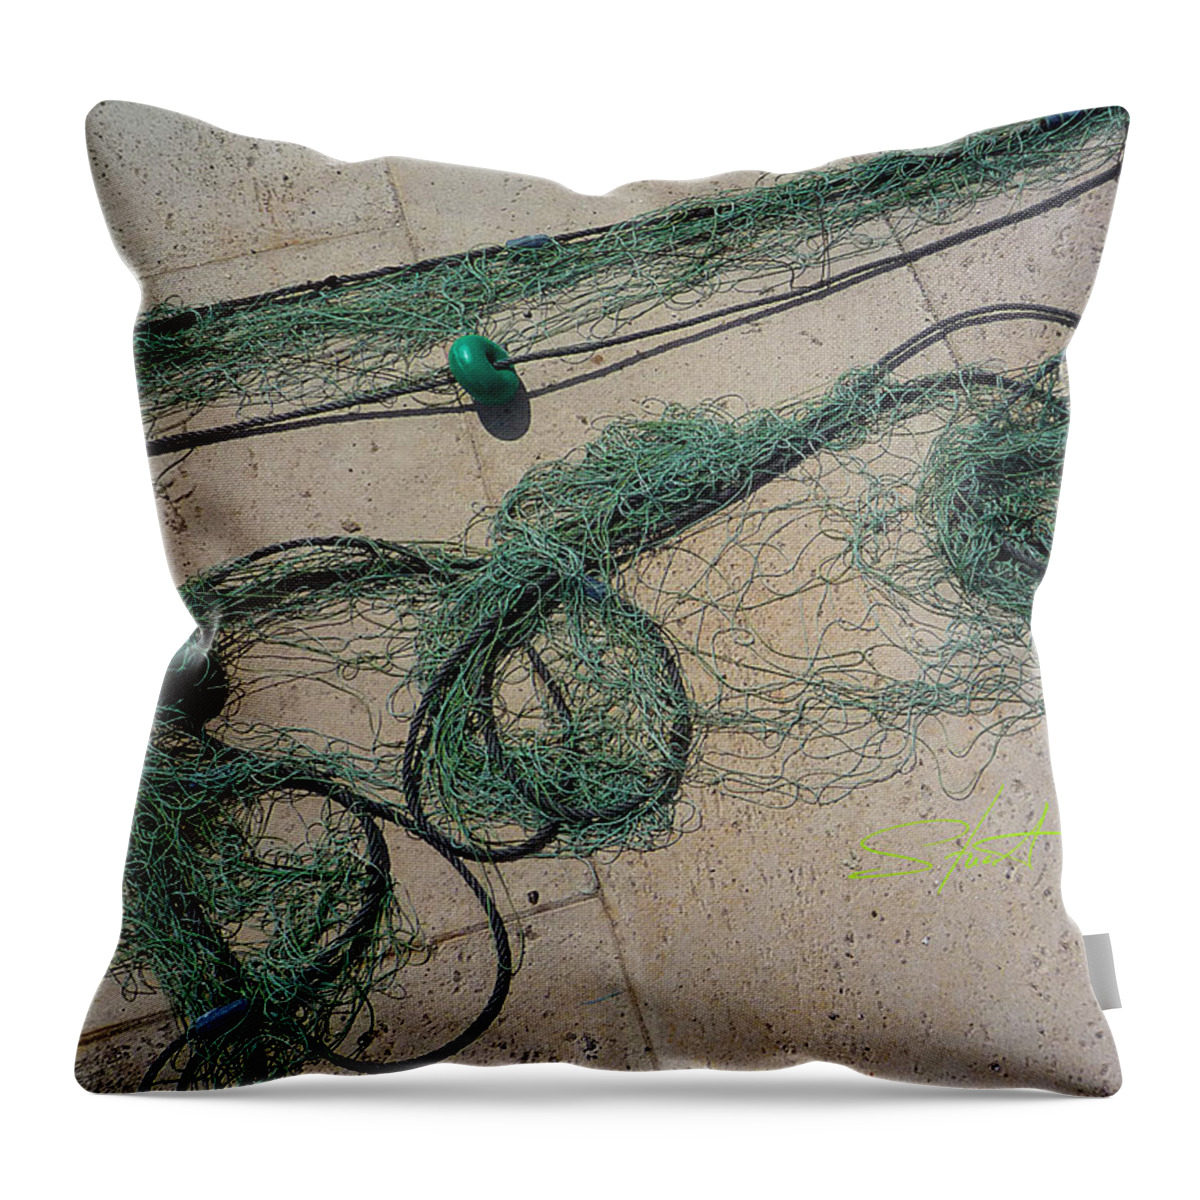 Fishing Net Throw Pillow featuring the photograph Neptune Green by Charles Stuart